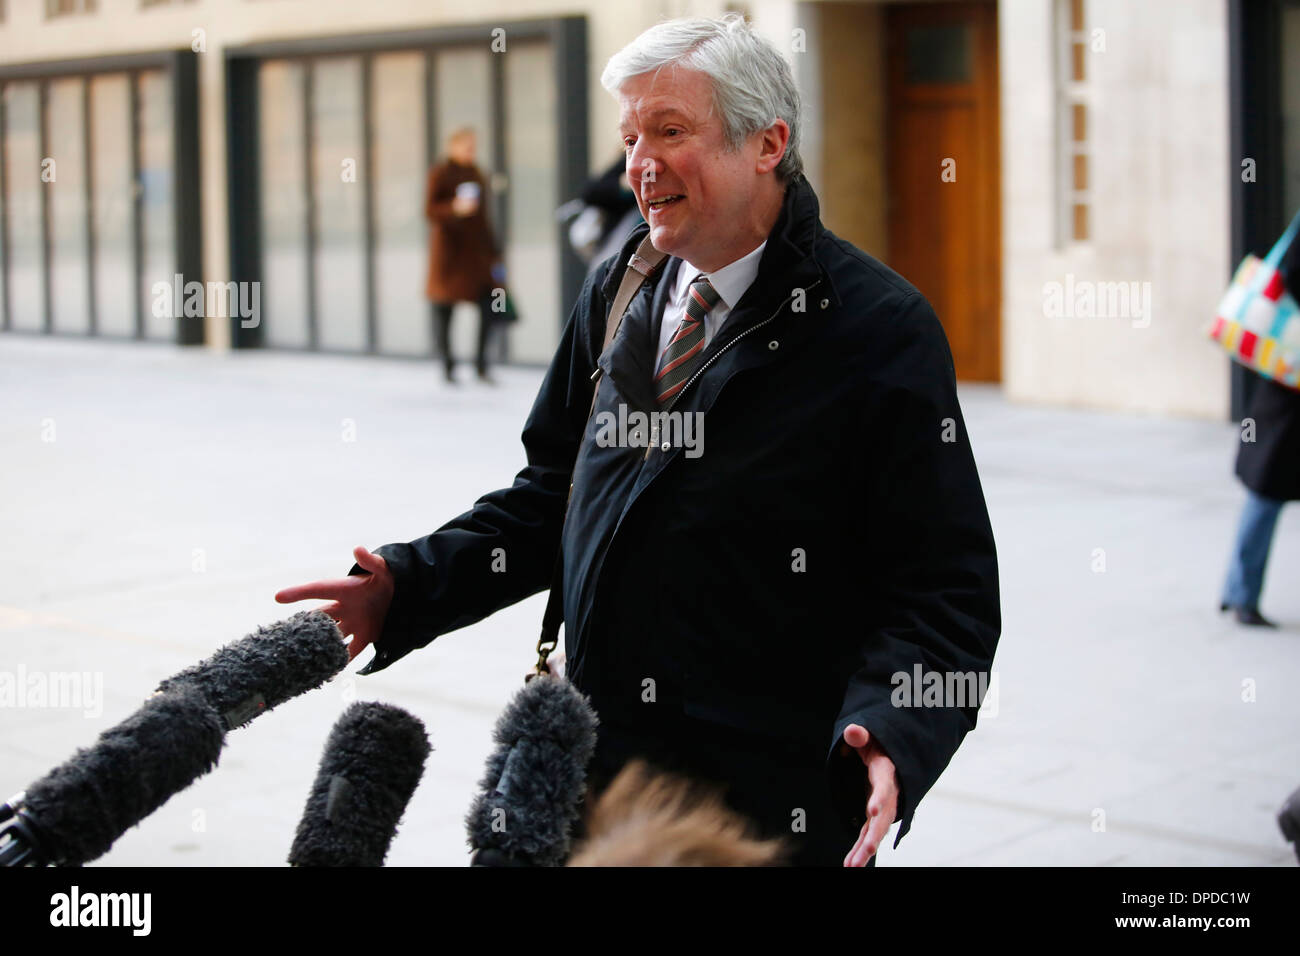 New BBC boss Tony Hall arrives to BBC Broadcasting House for his first day work Stock Photo